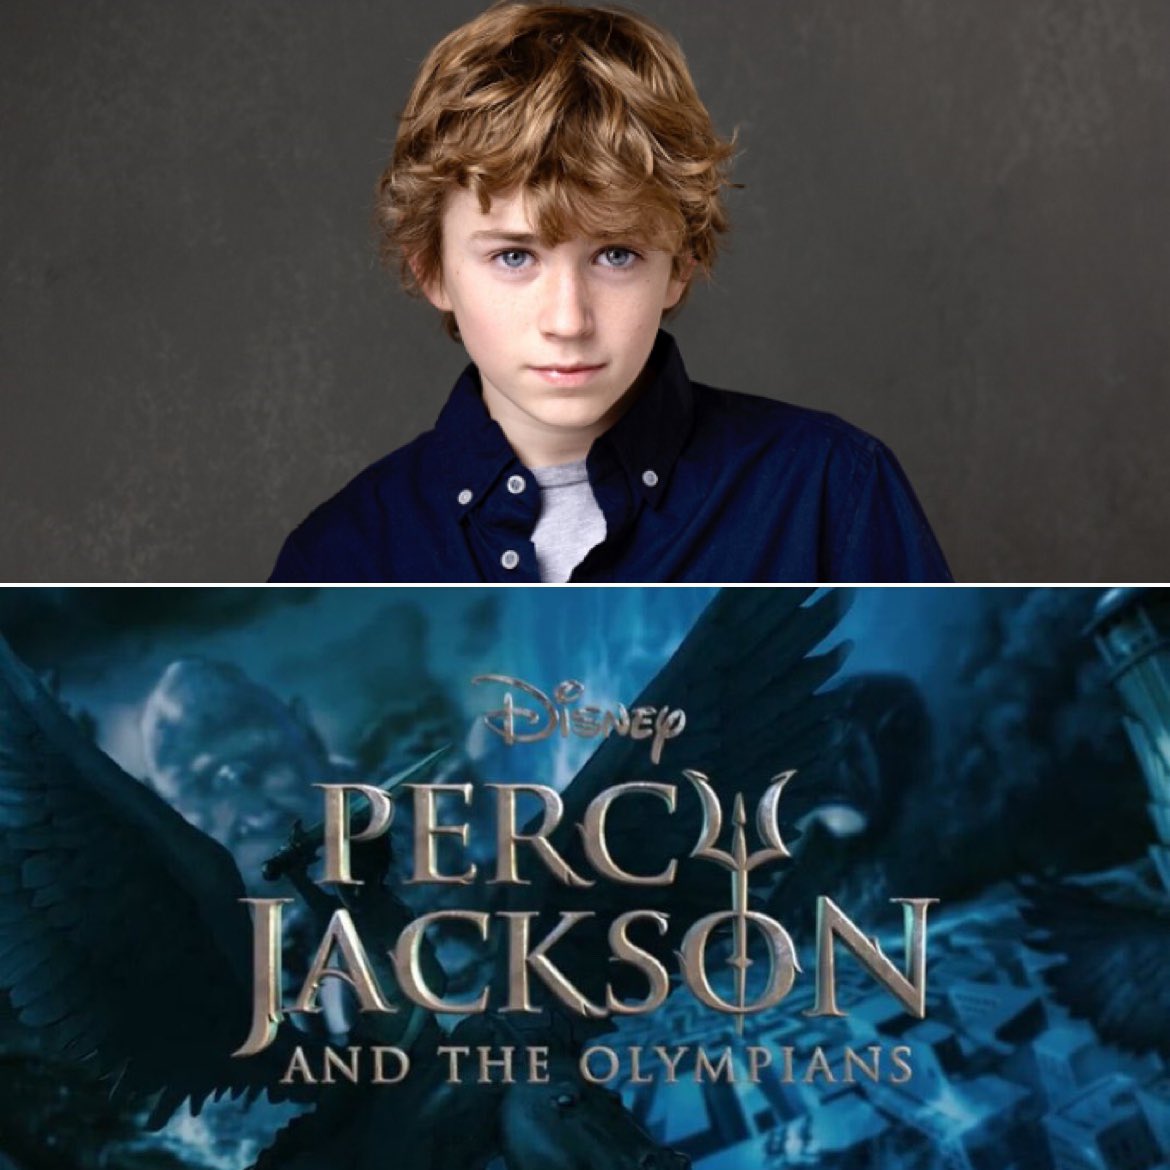 The Adam Project's Walker Scobell cast as Percy Jackson for Disney+ series